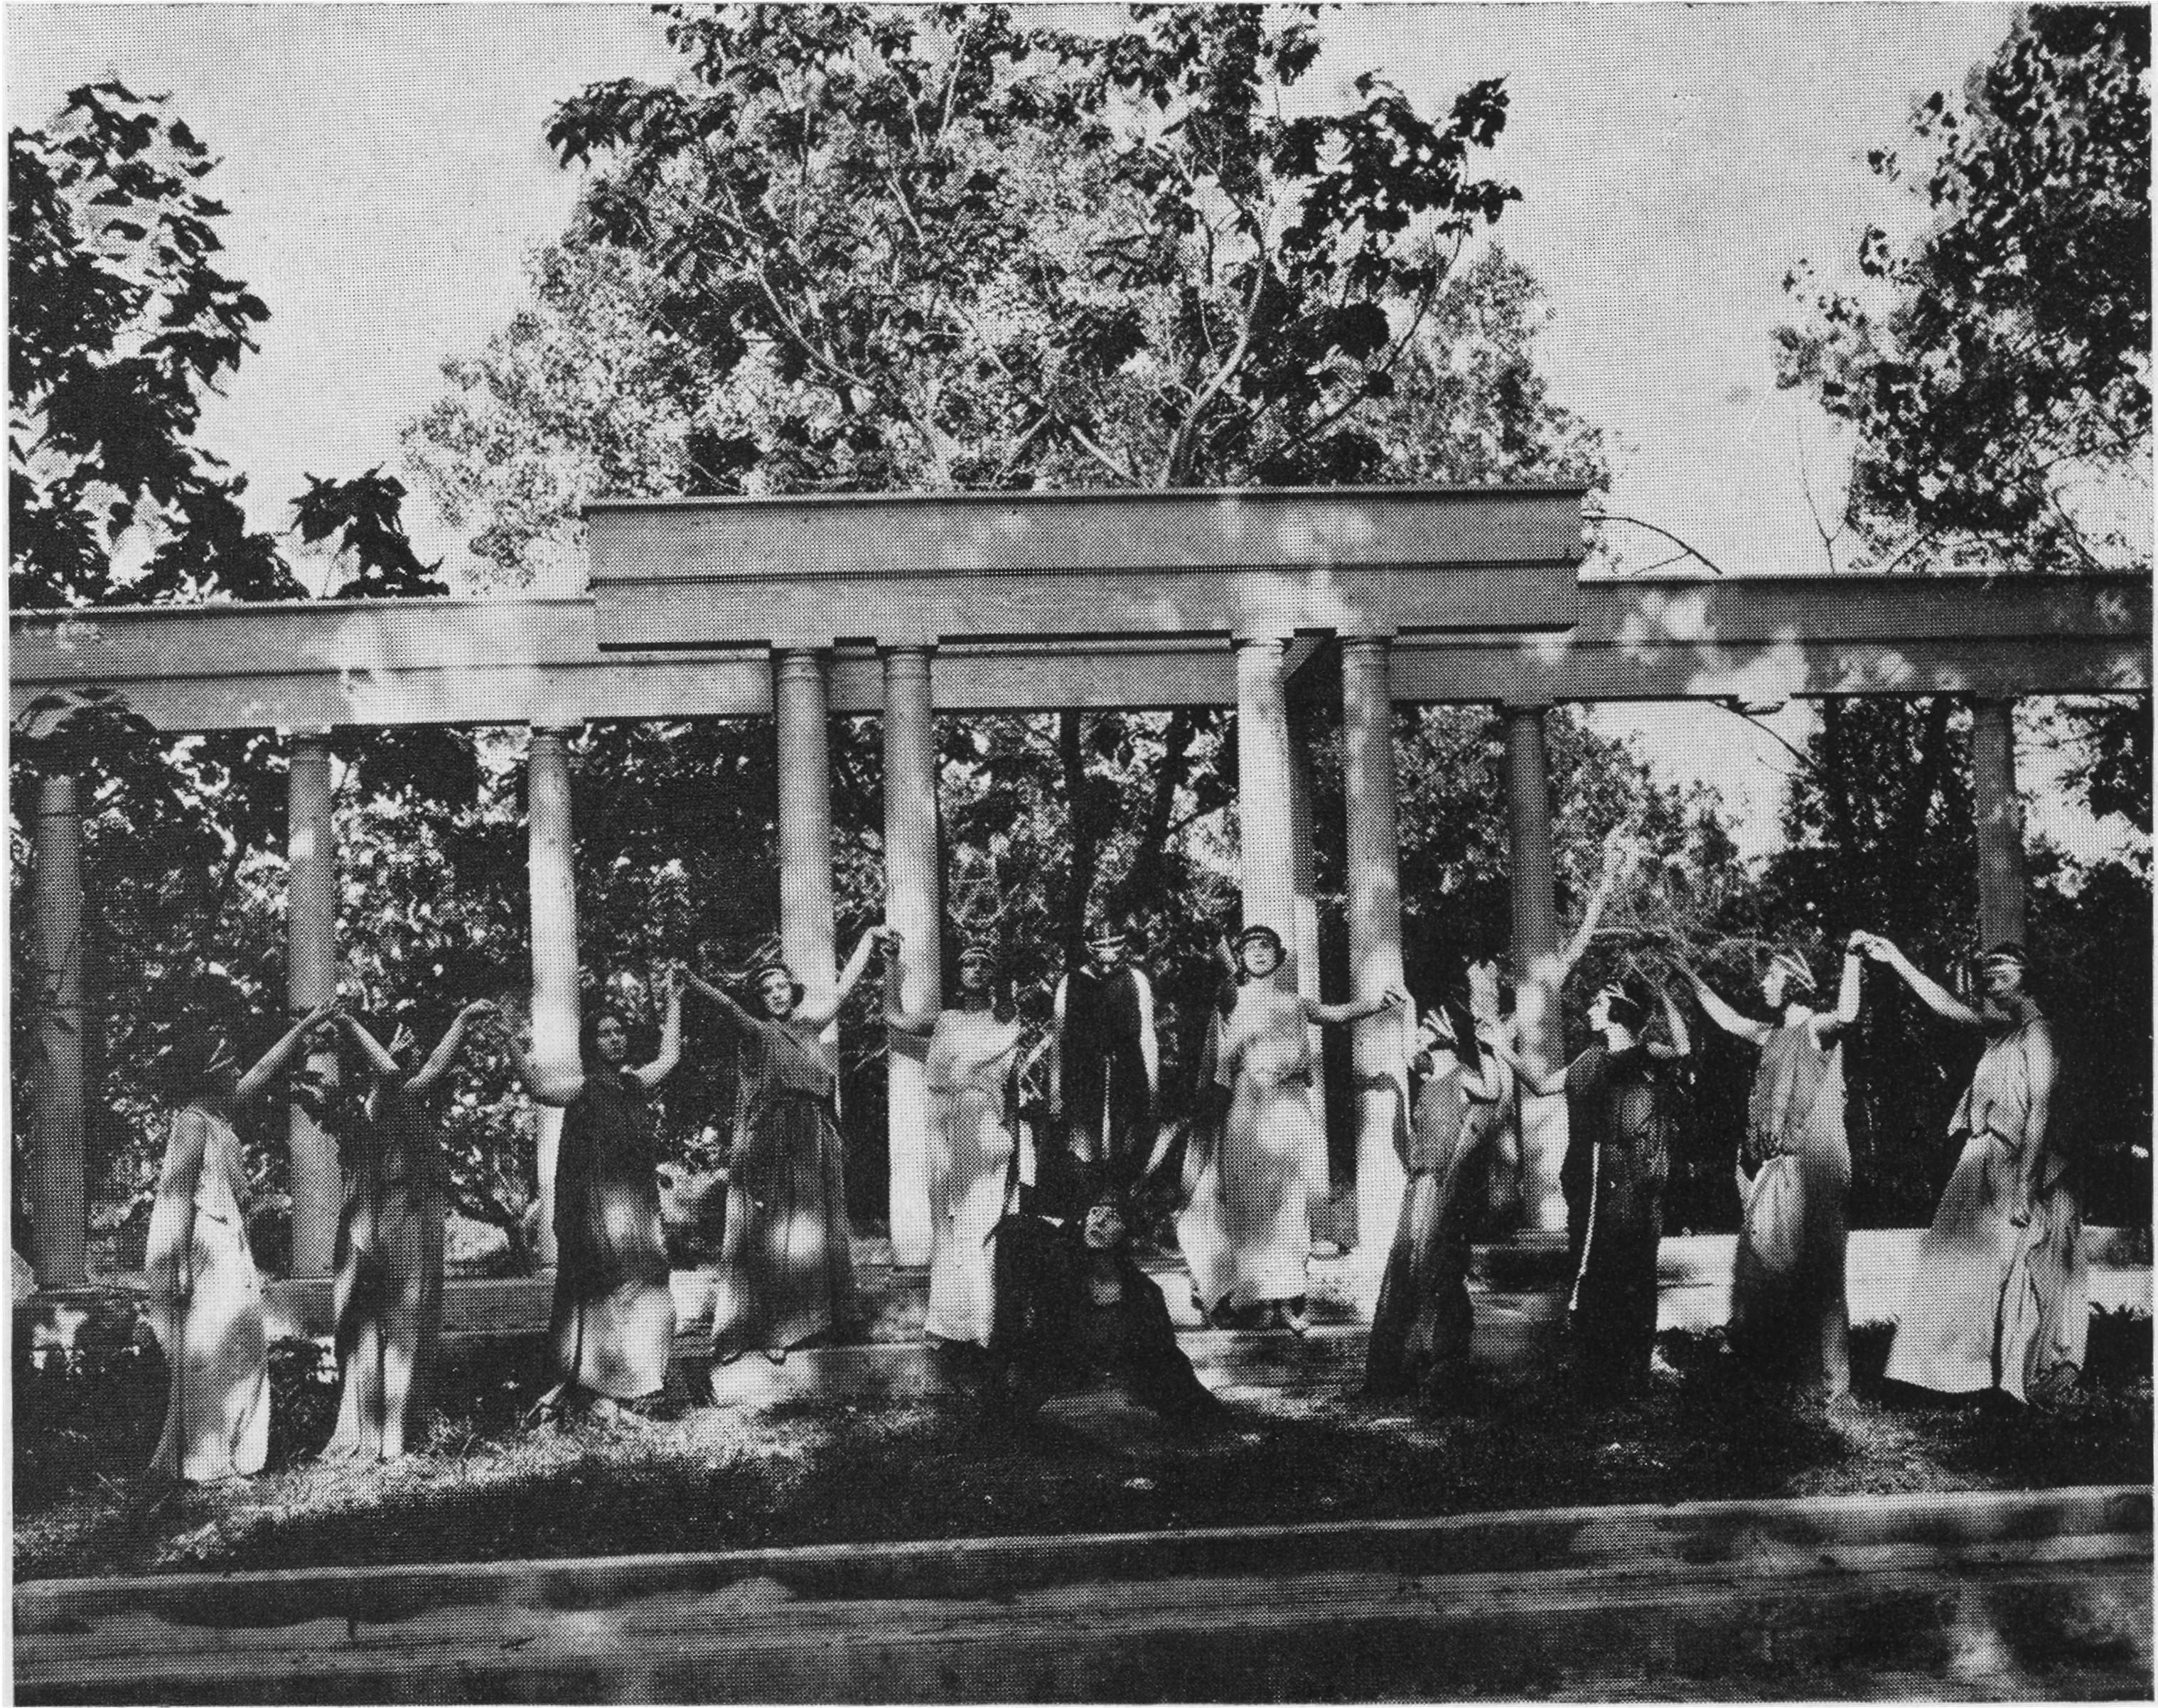 Black and white image of USAO's Greek Theater in 1926